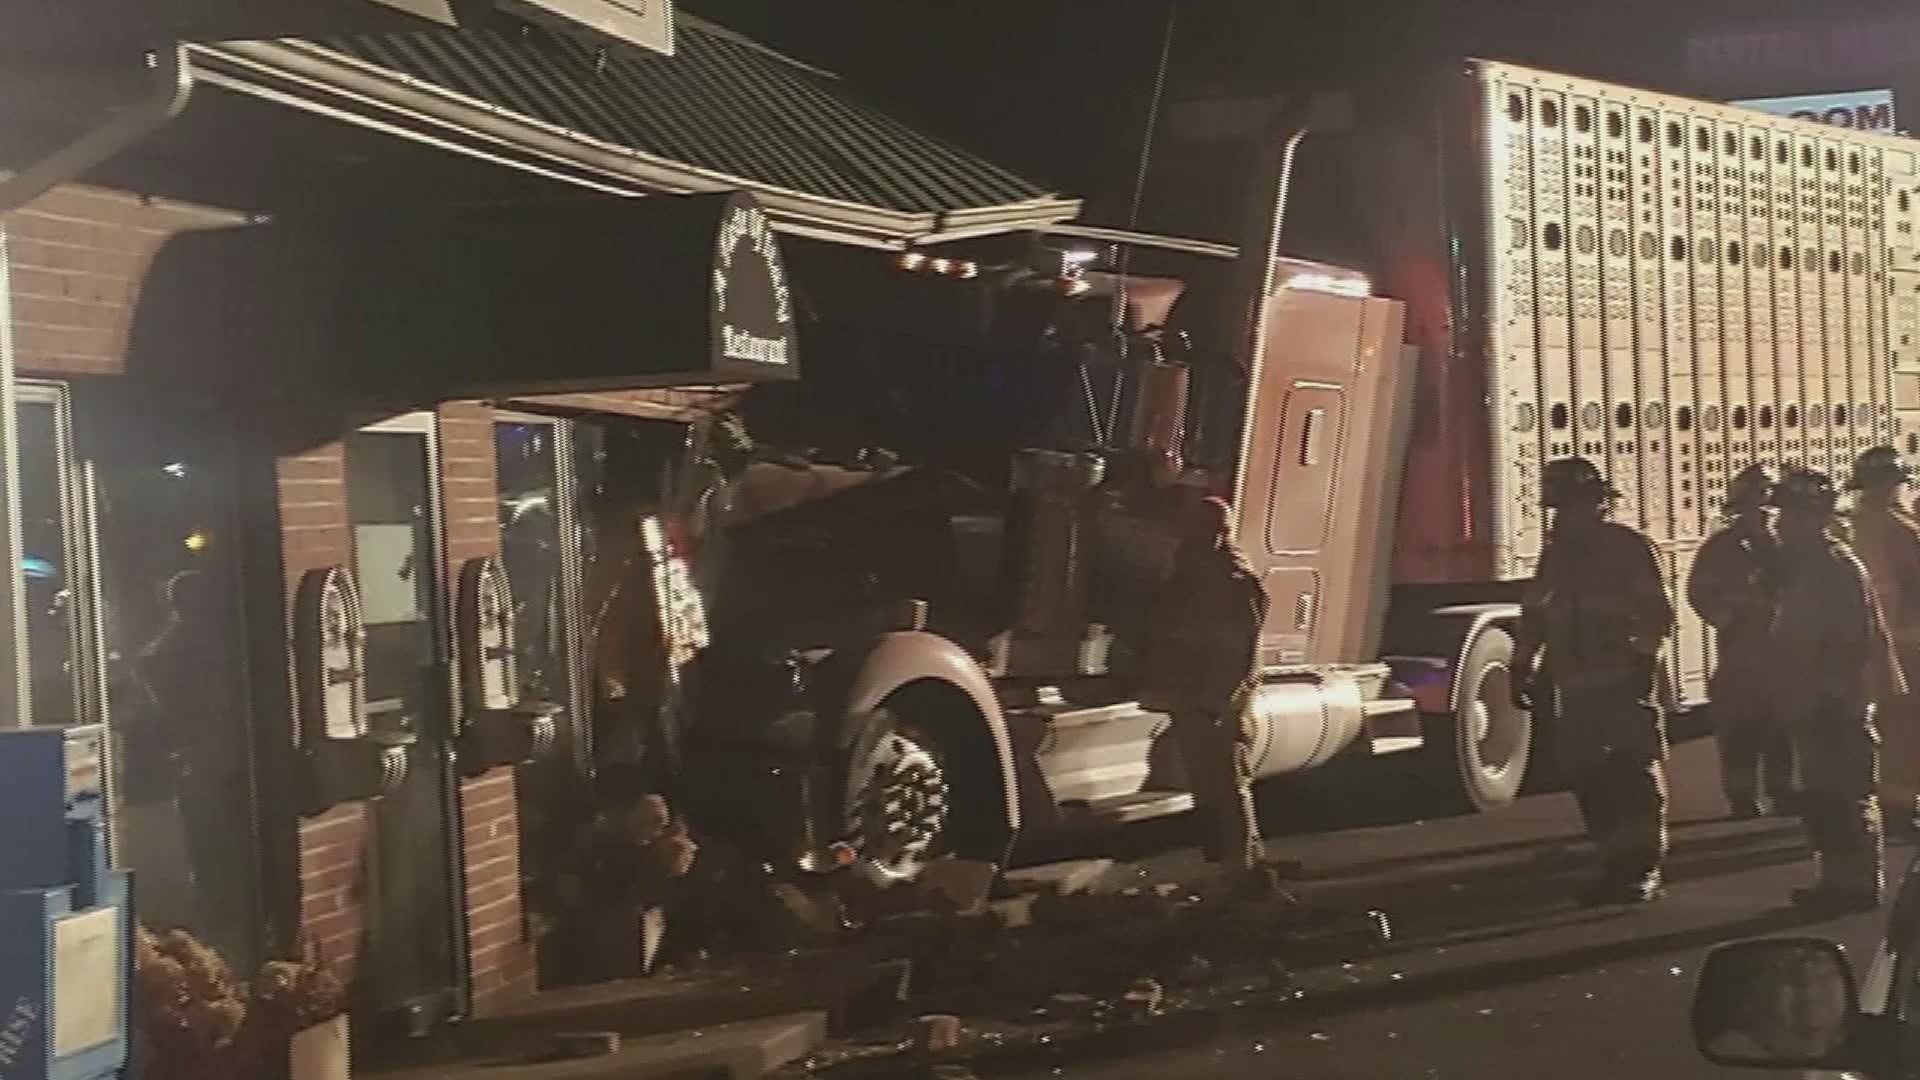 A cattle truck ran off the road and slammed into A Taste of Italy.